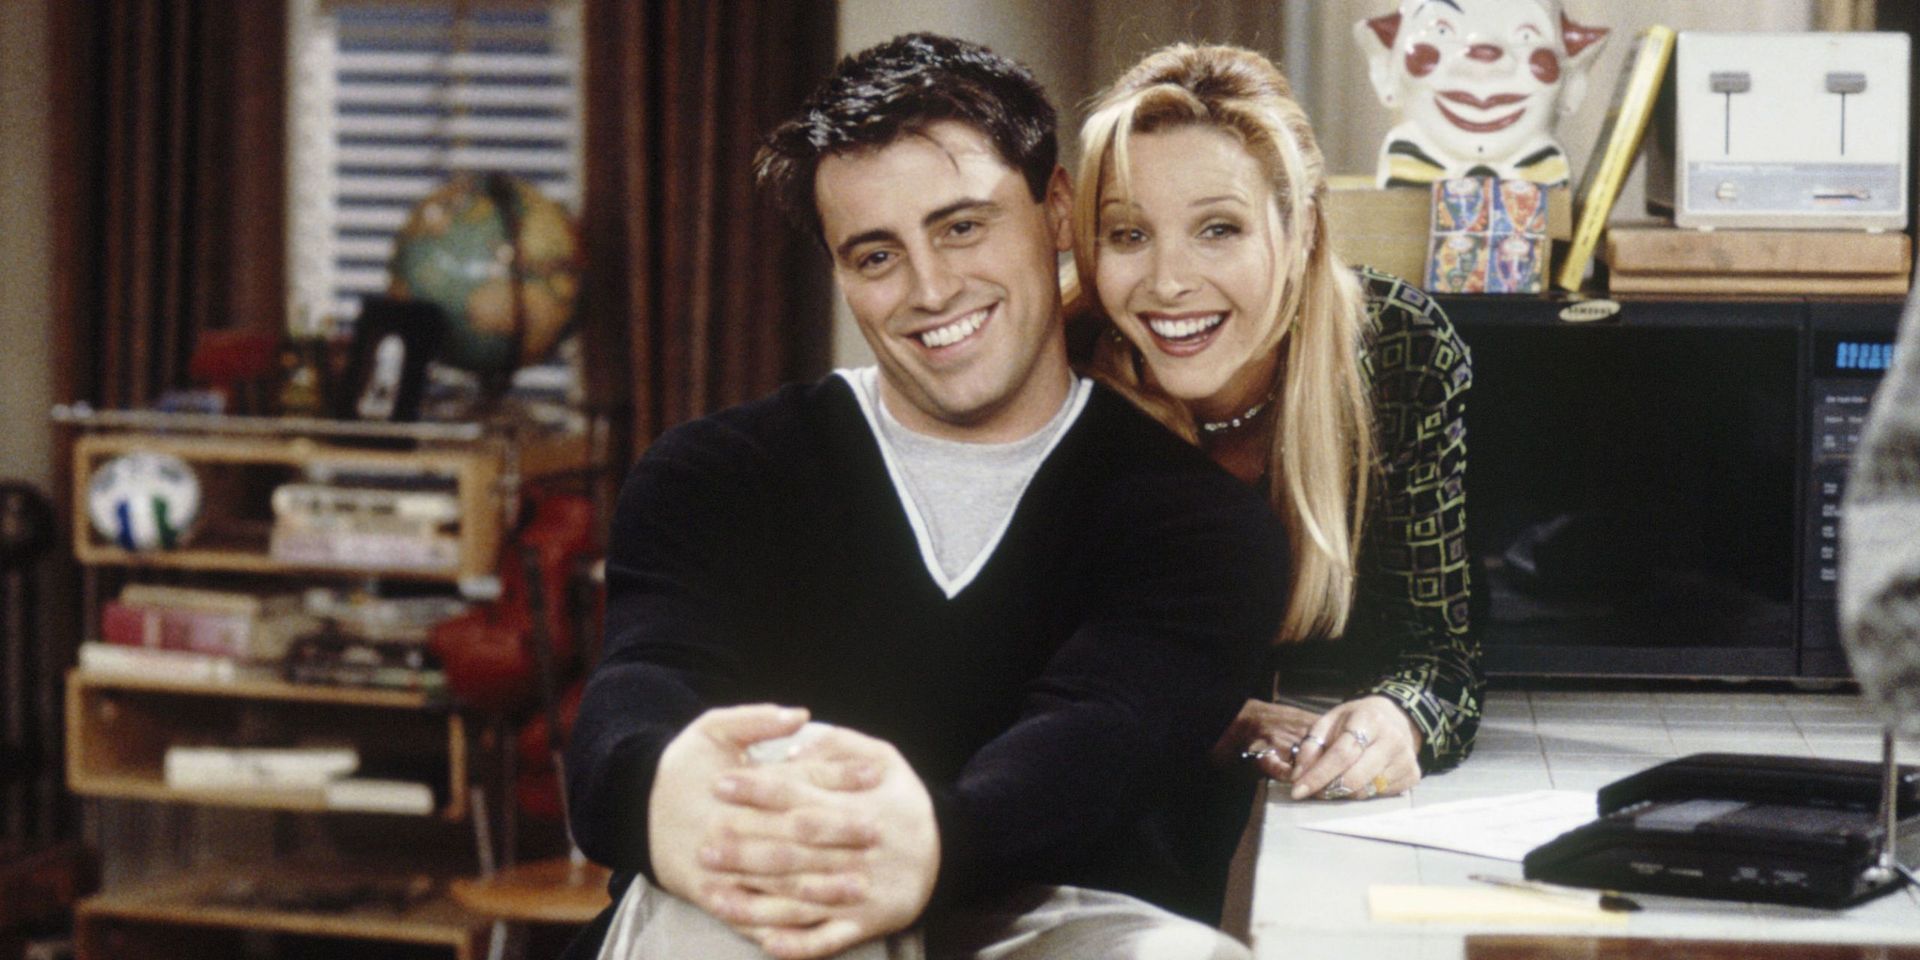 Joey and Phoebe looking at the camera and smiling in Friends